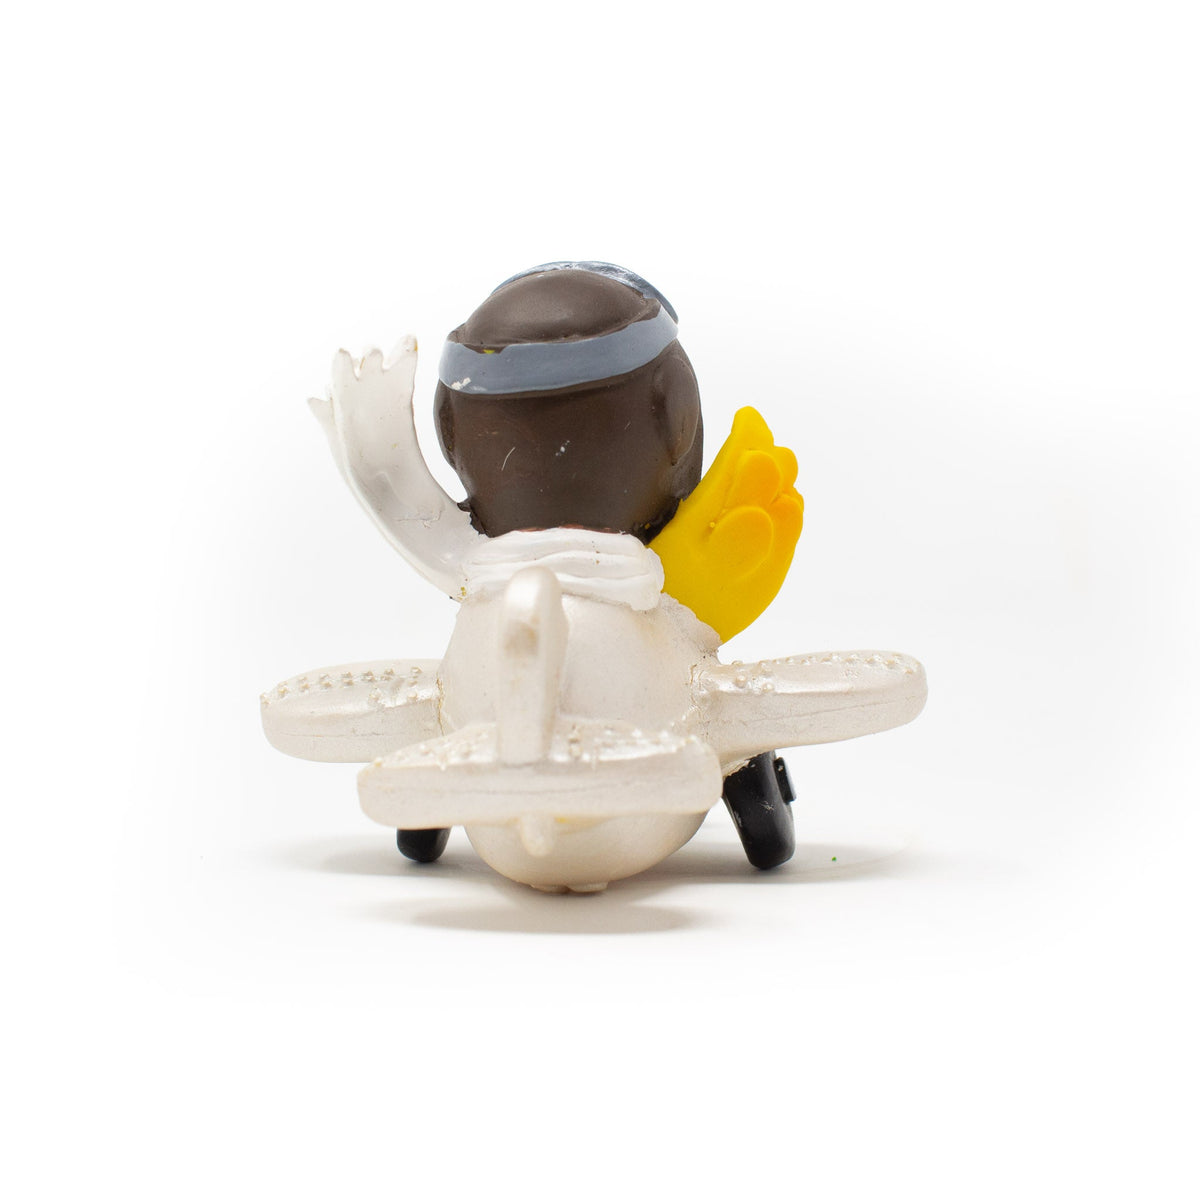 Rubber Duck in Airplane - Natural Rubber Toys